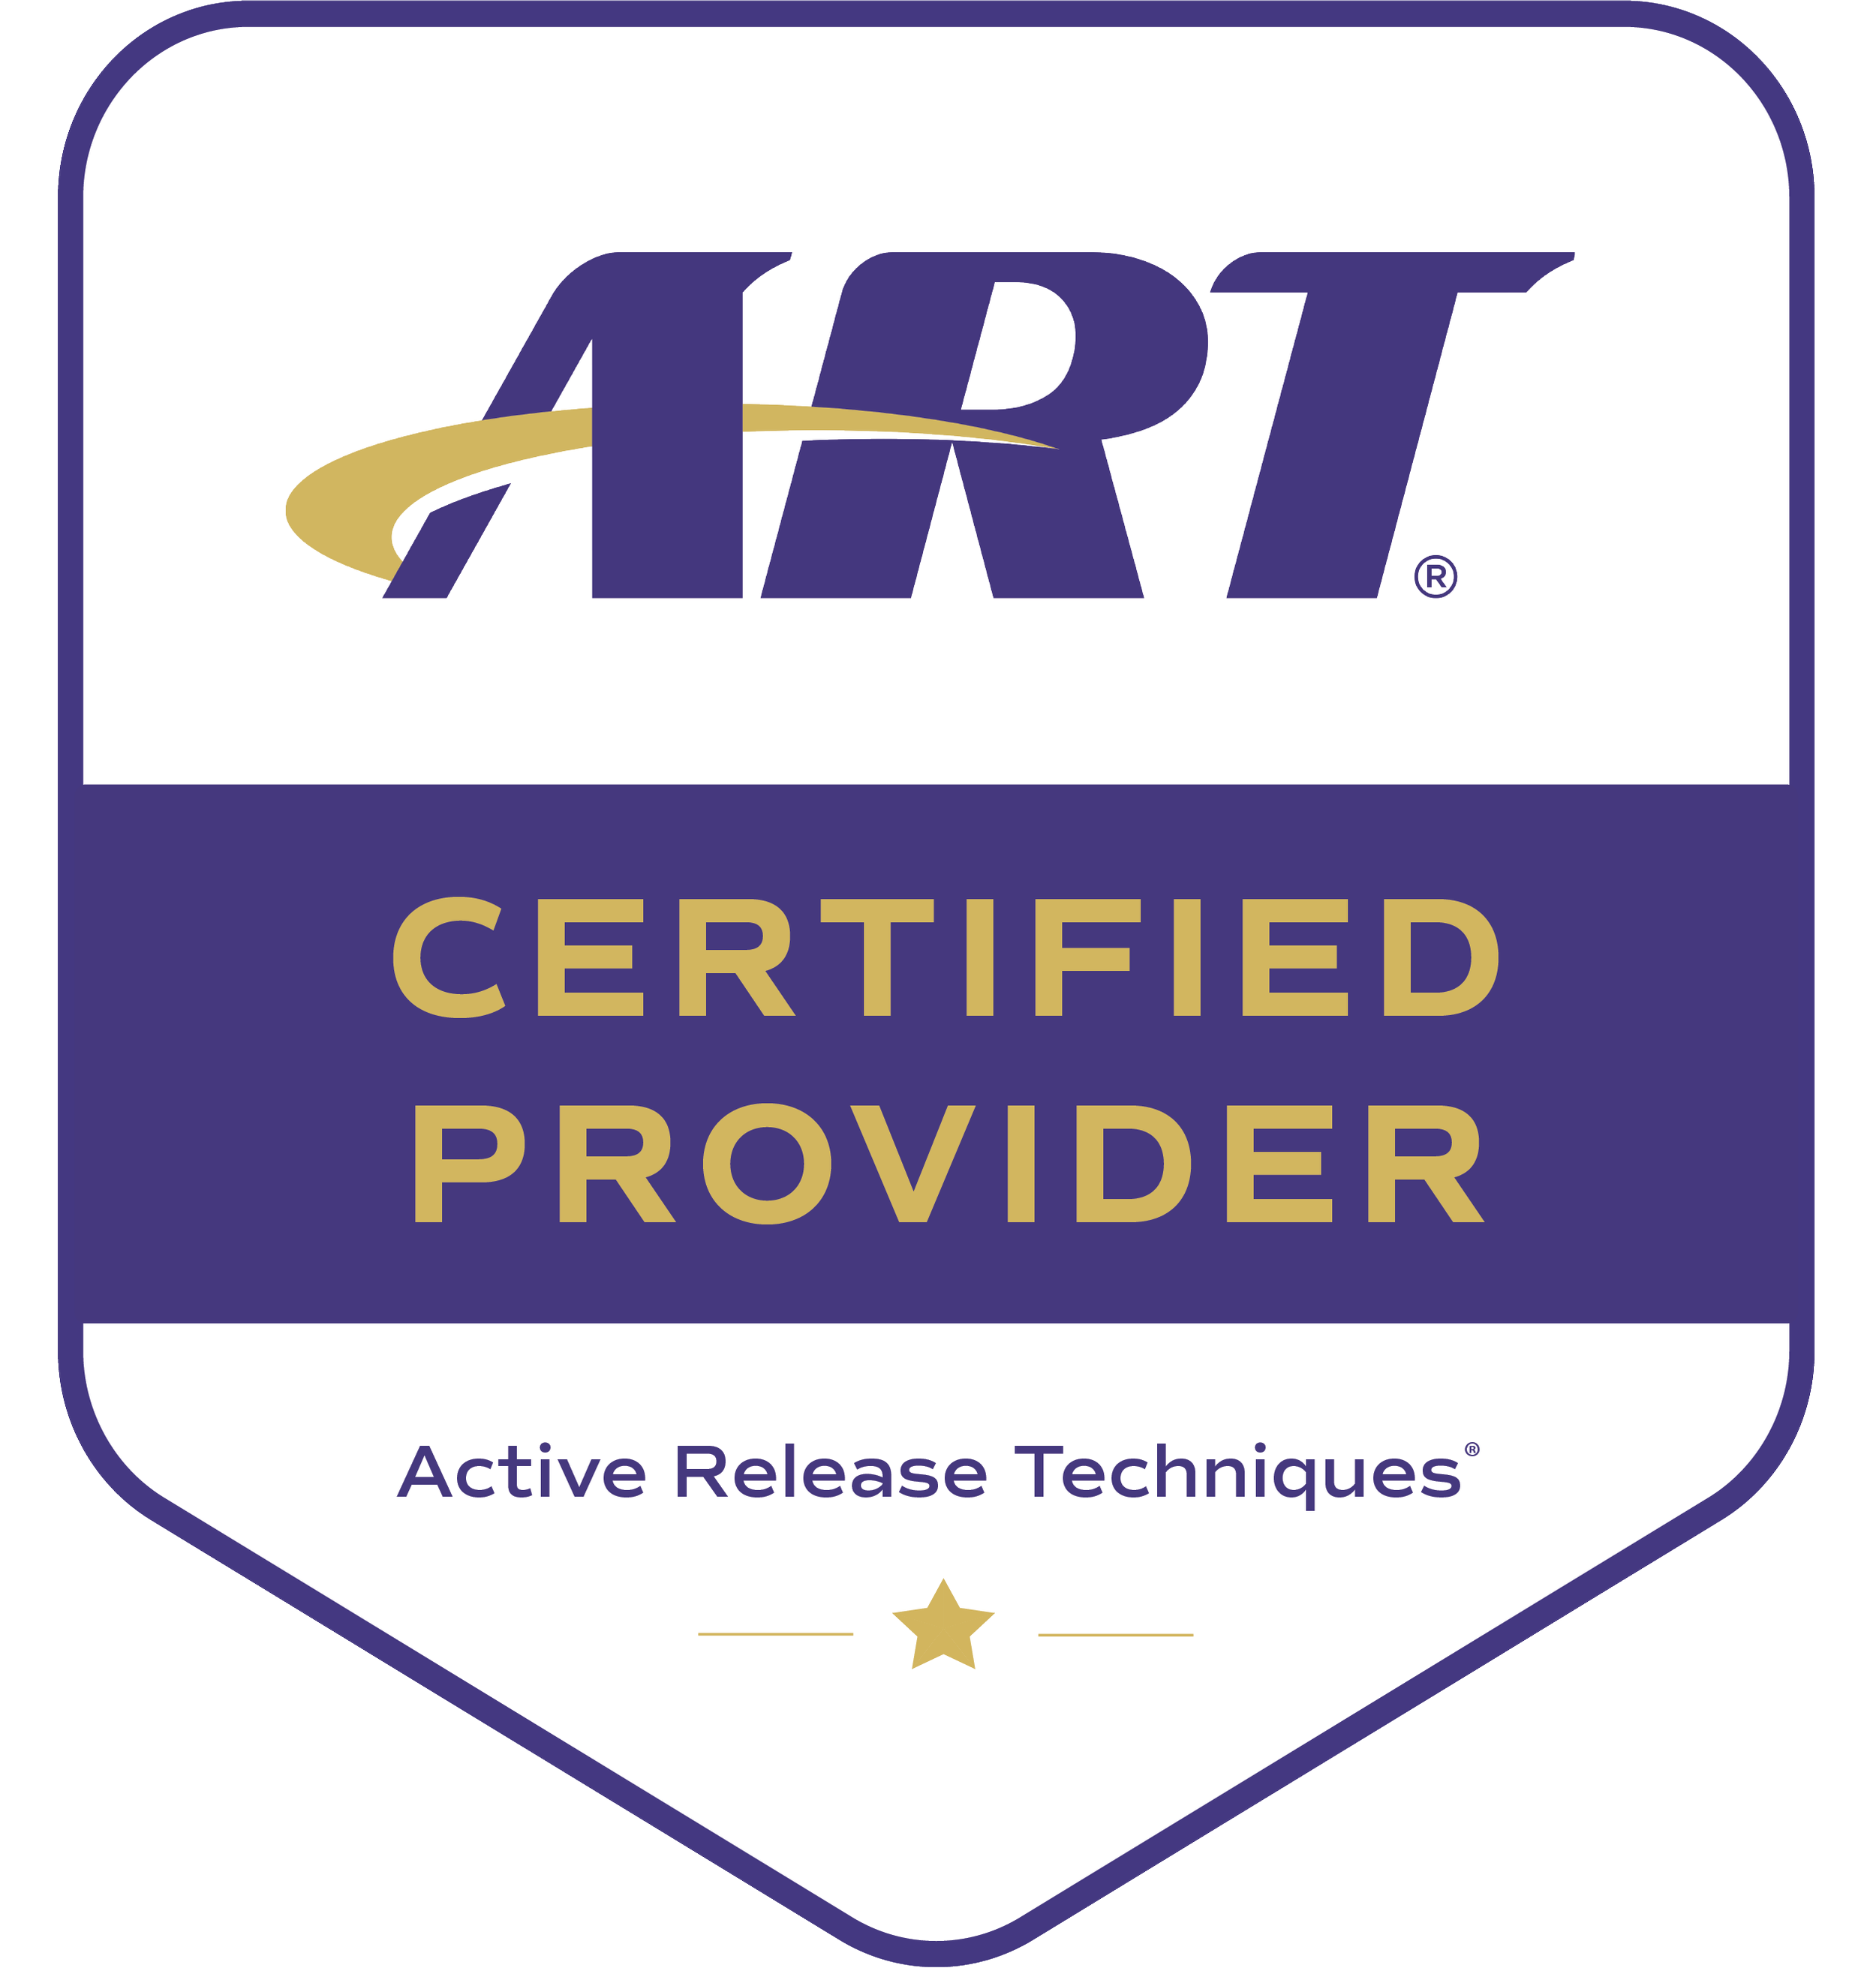 Certified Provider Logo_1b.png